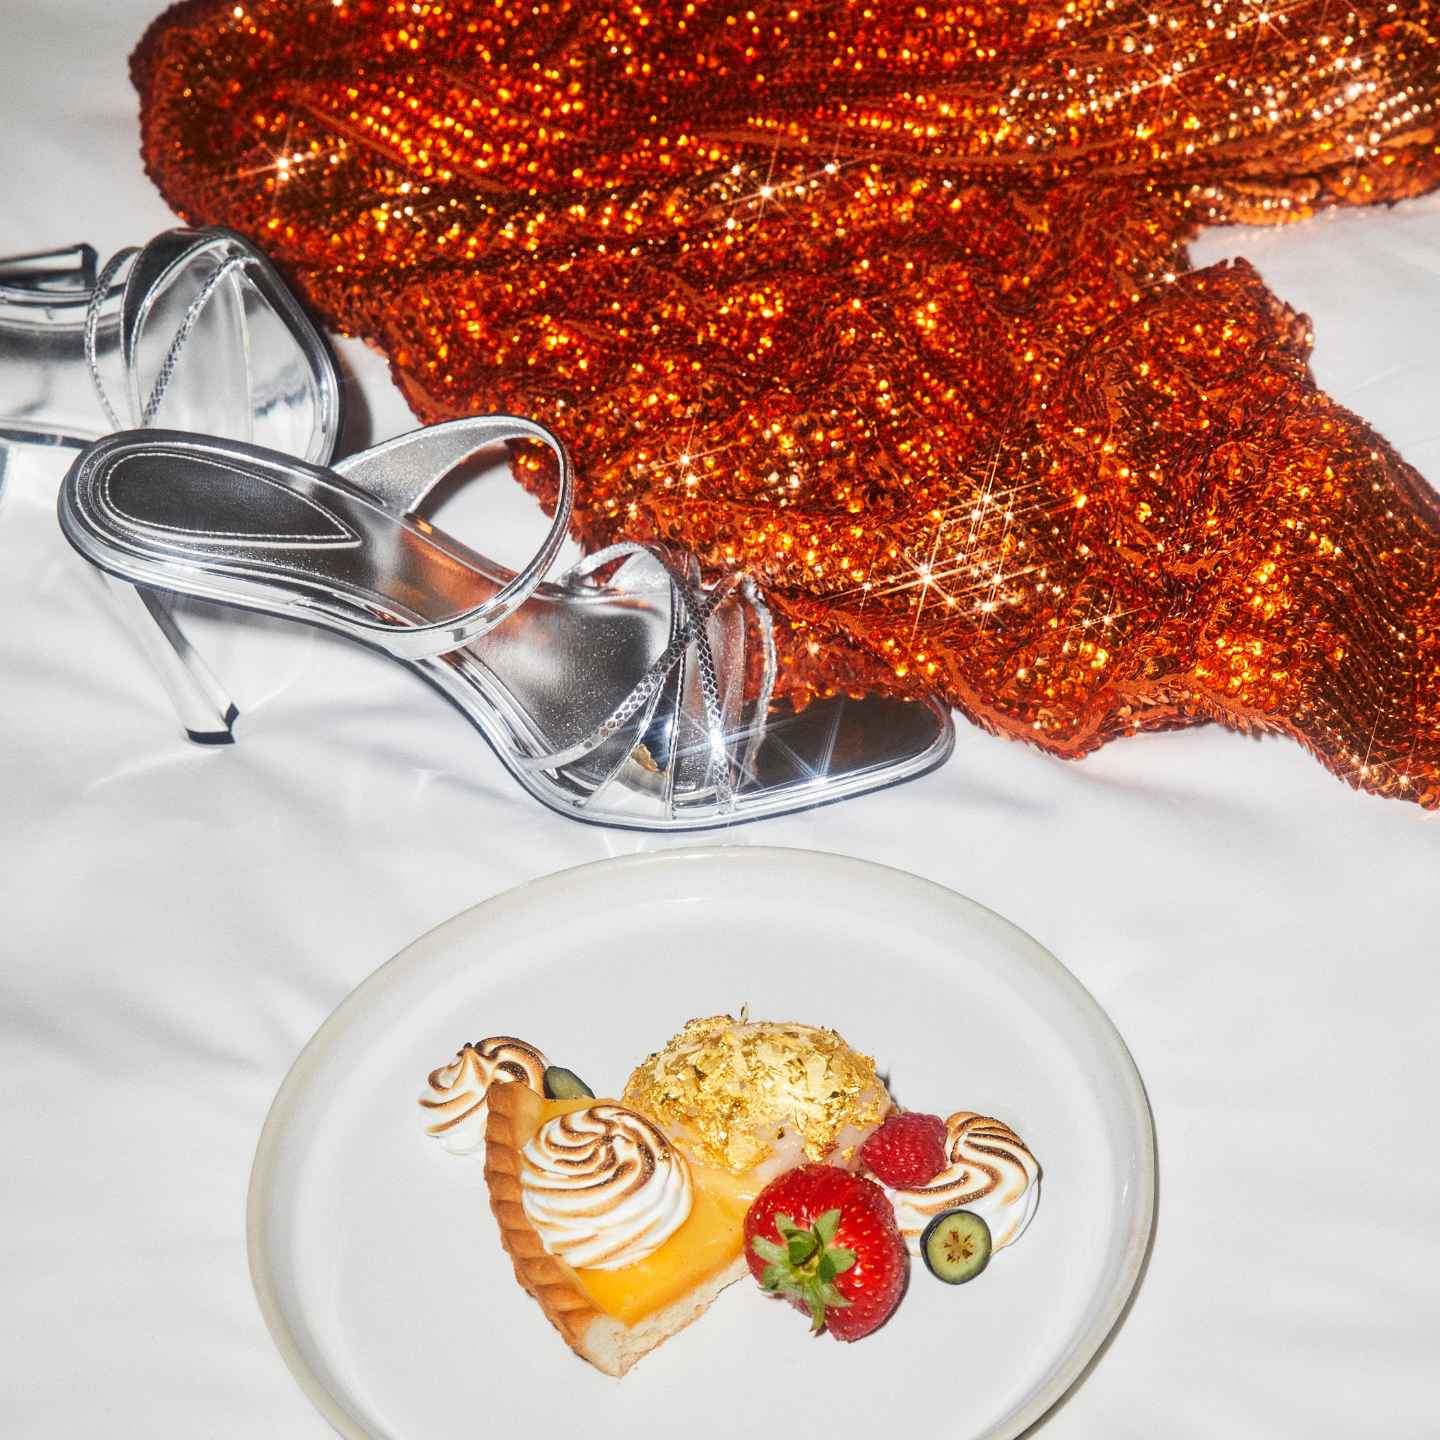 Dessert on plate, silver heels, and orange glittery blouse laying on a white bed at Sanderson hotel London